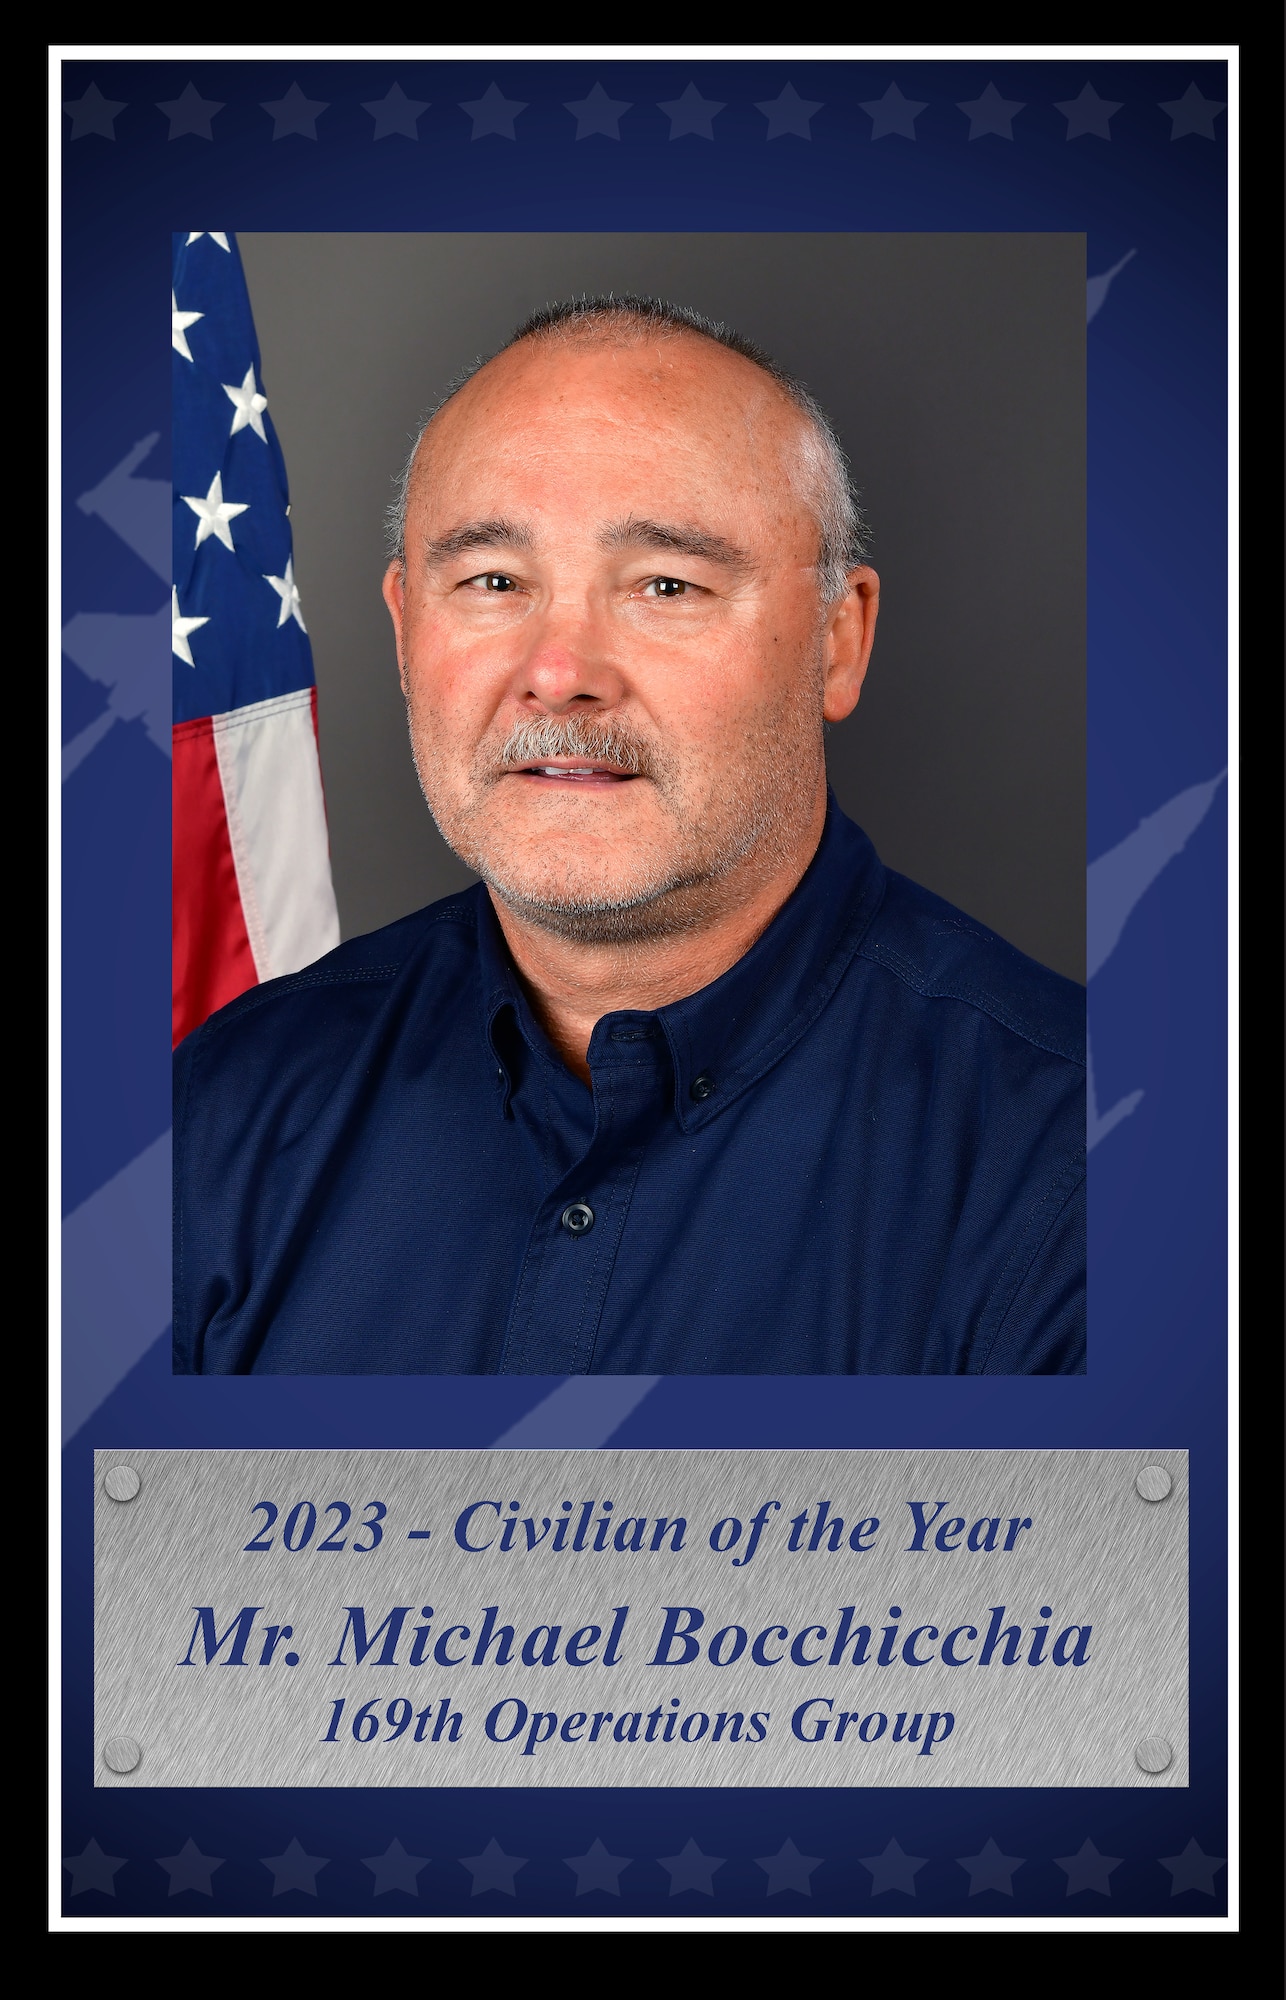 Mr. Michael Bocchicchia, 169th Fighter Wing Civilian of the Year 2023